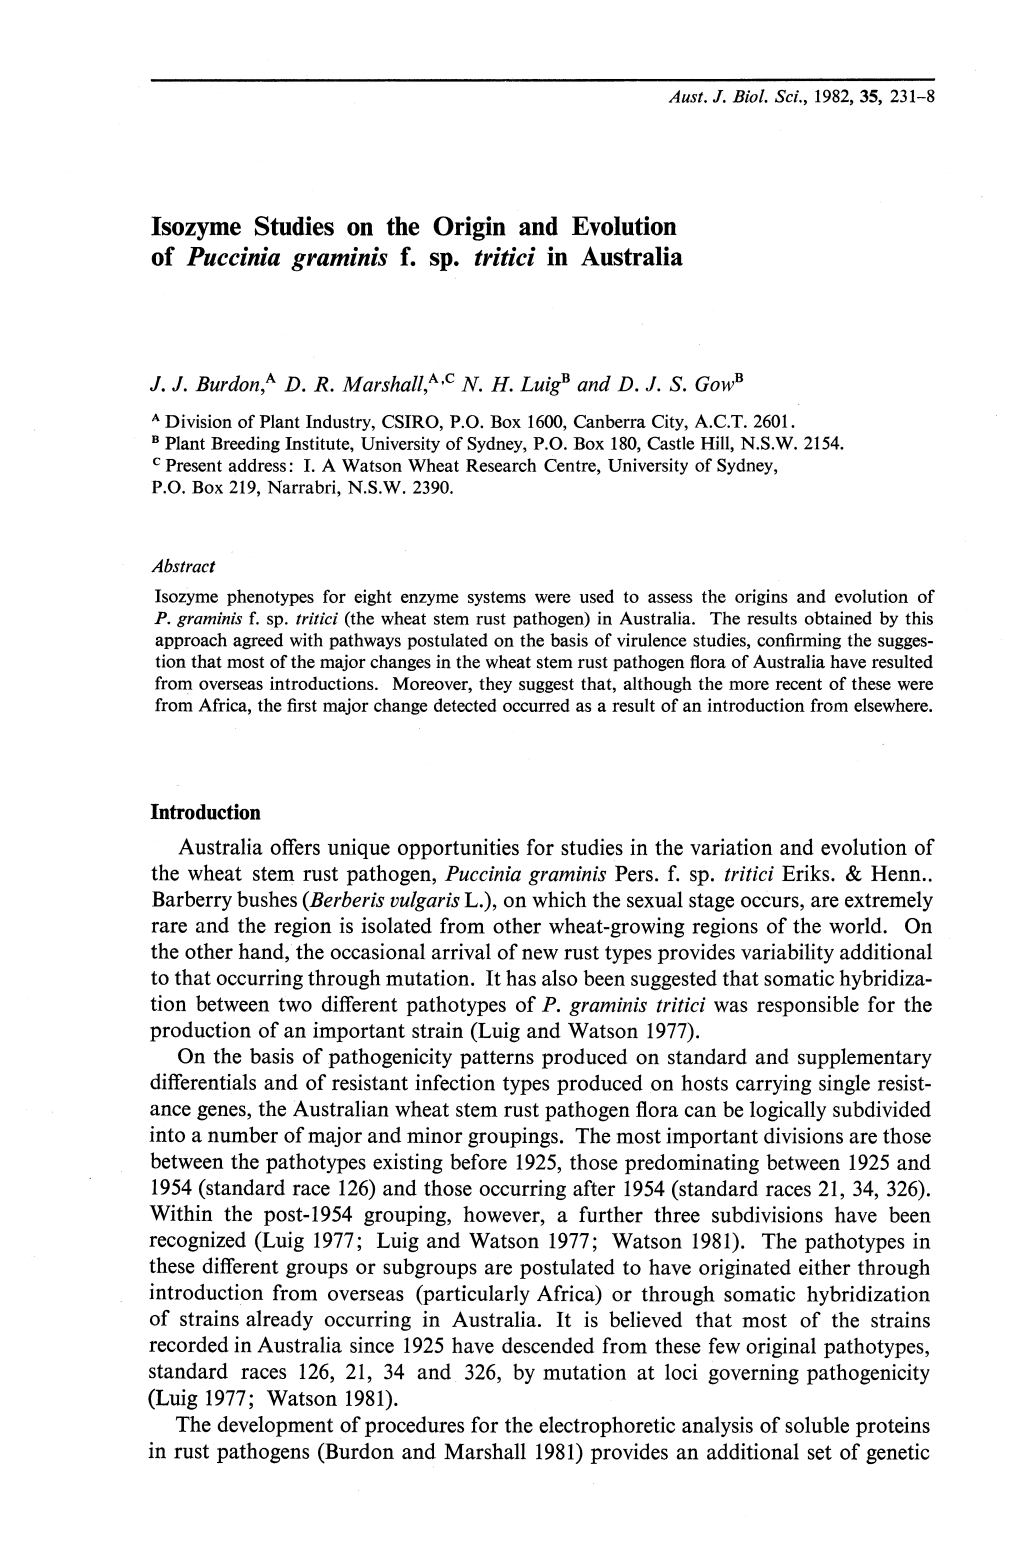 Isozyme Studies on the Origin and Evolution of Puccinia Graminis F